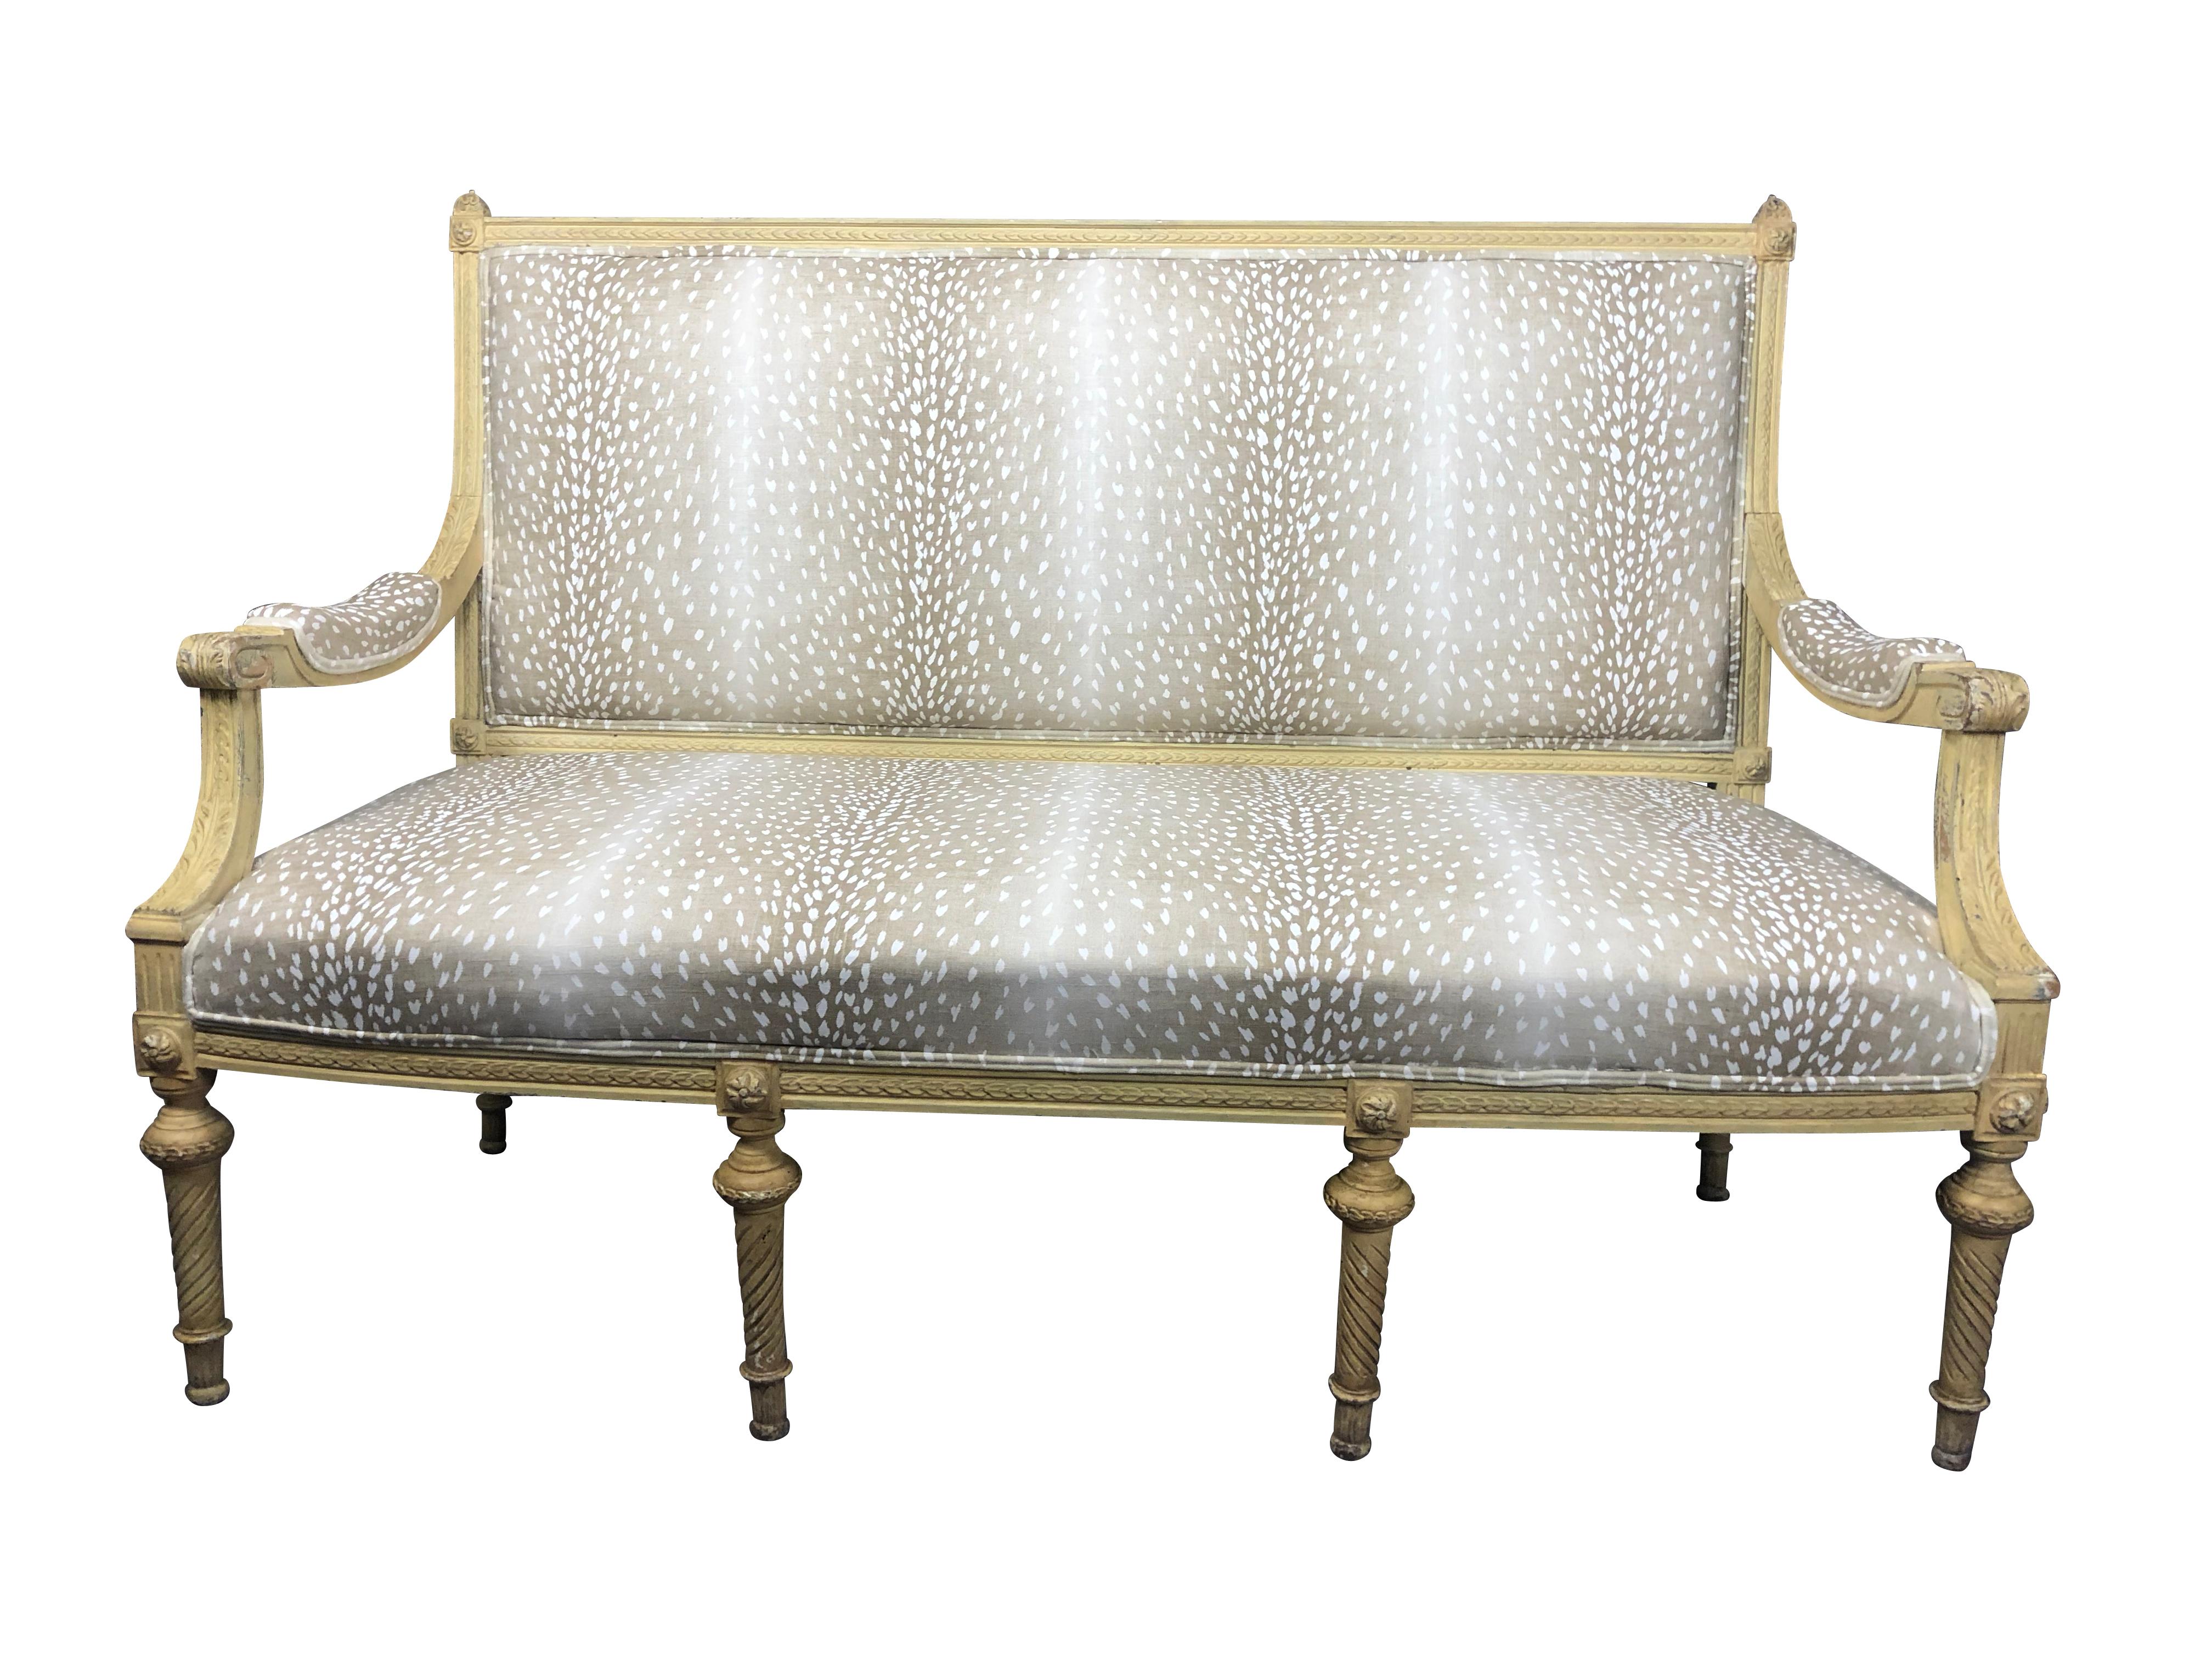 19th century Louis XVI French style settee in antelope fabric, original cream painted French settee with carved foliate, and rosette design. Newly reupholstered in light taupe antelope print fabric. Turned legs, with a pleasing amount of paint loss